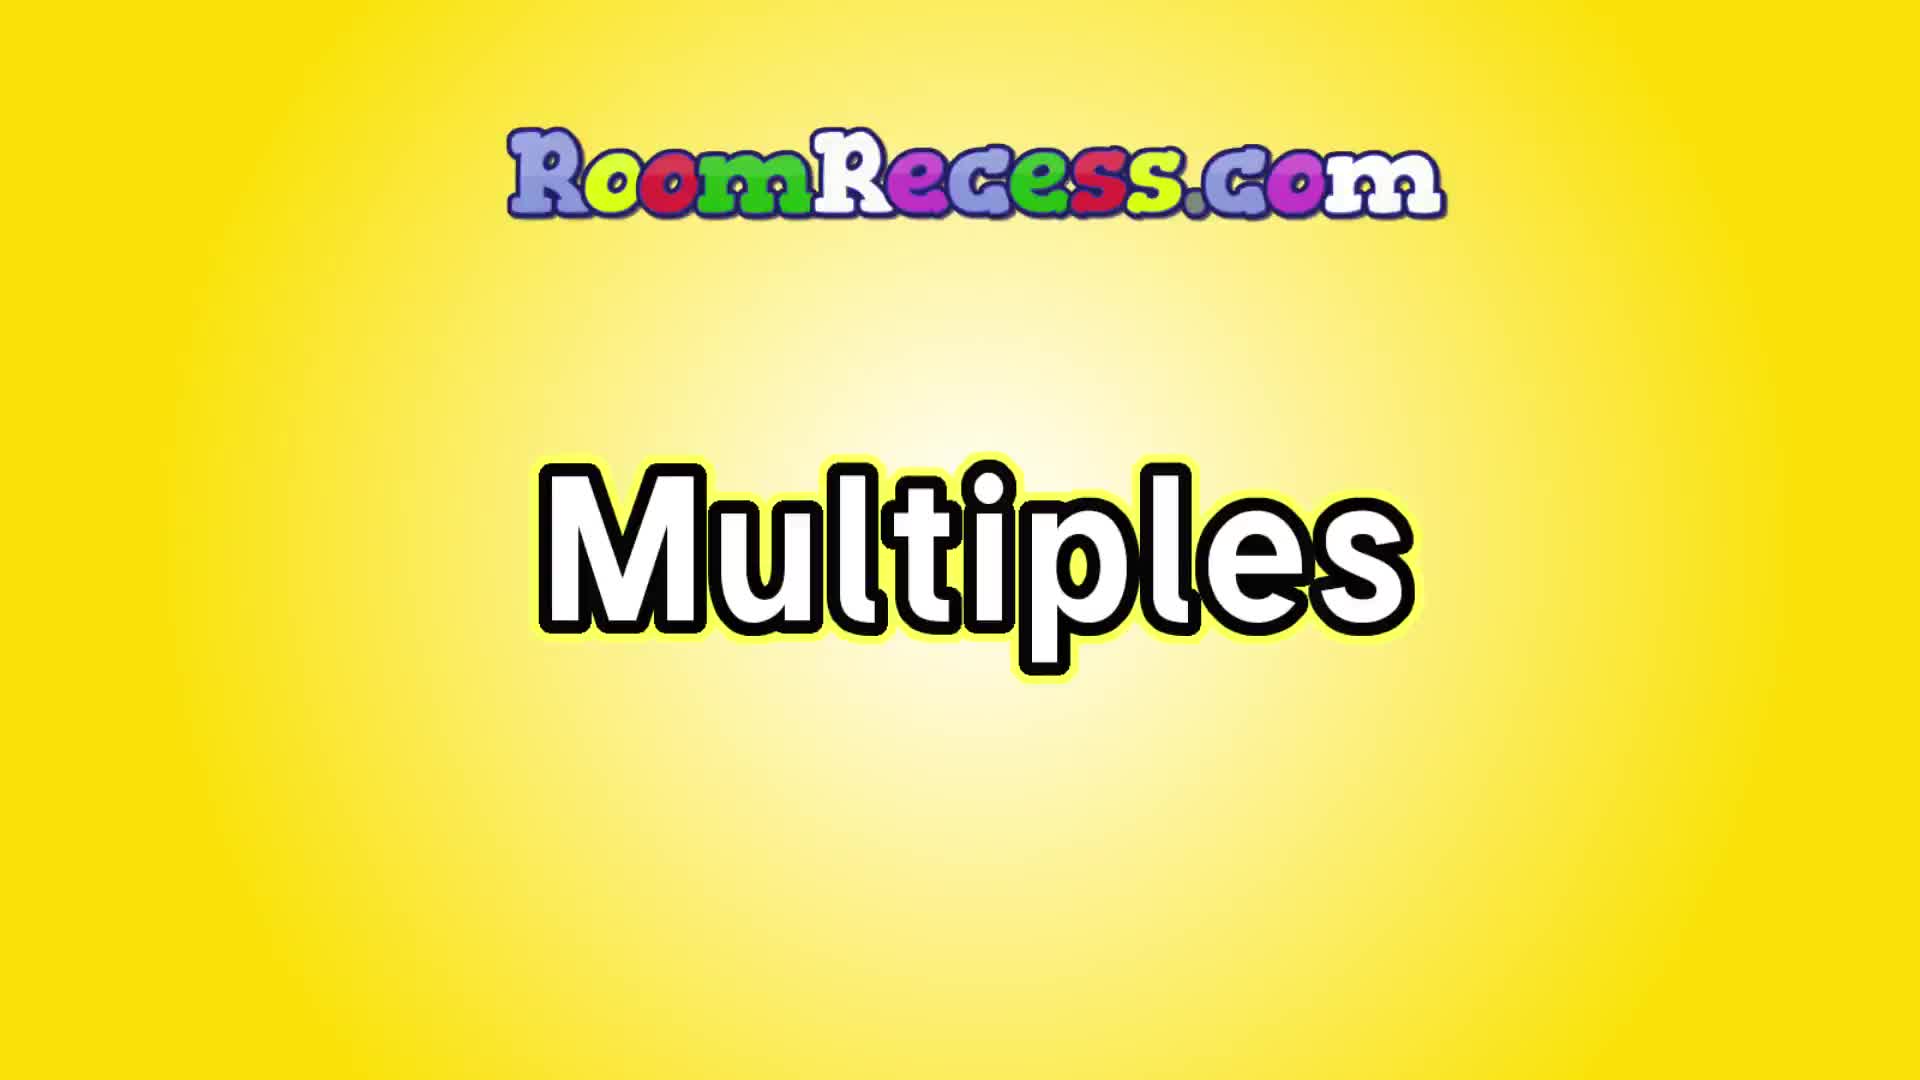 Multiples by RoomRecess.com